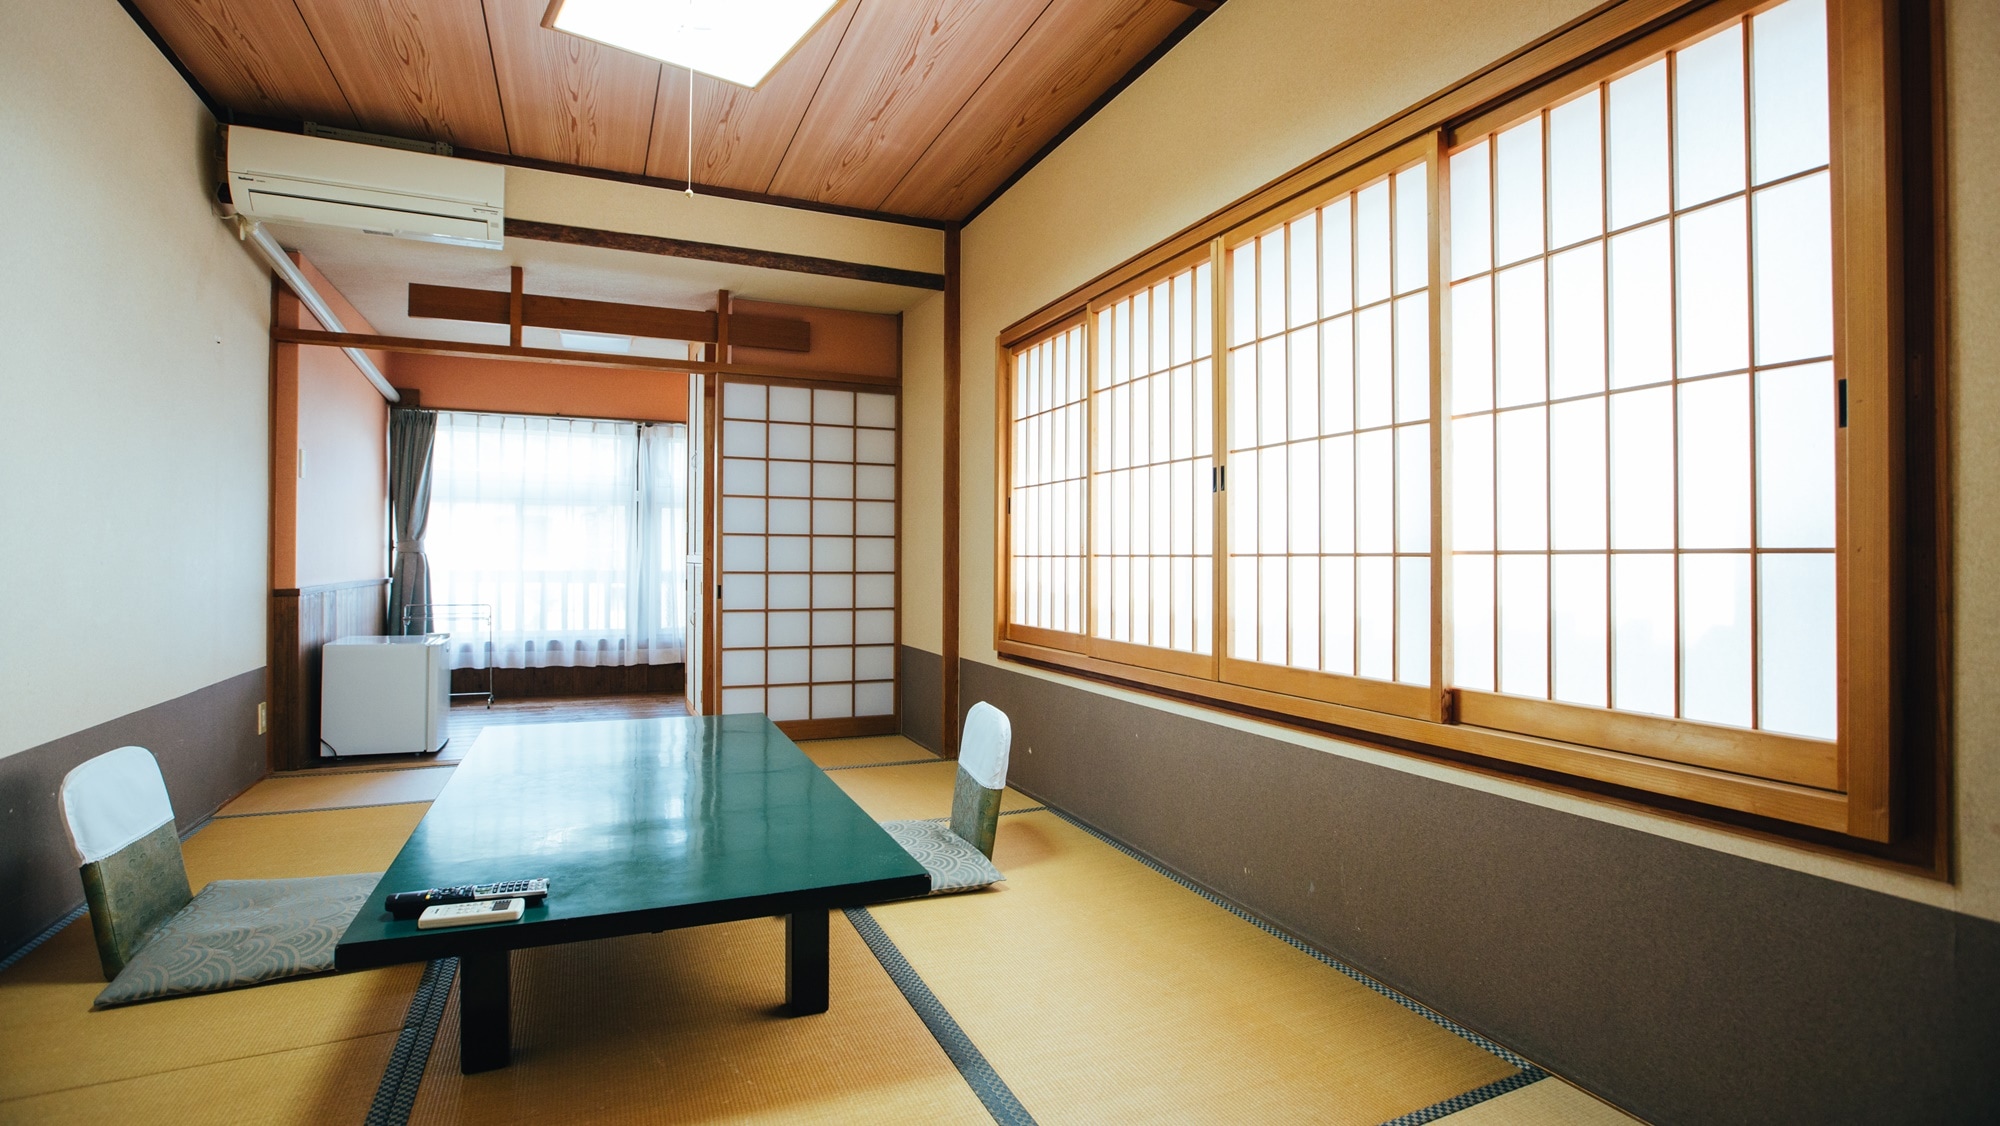 The guest room is a Japanese-style room